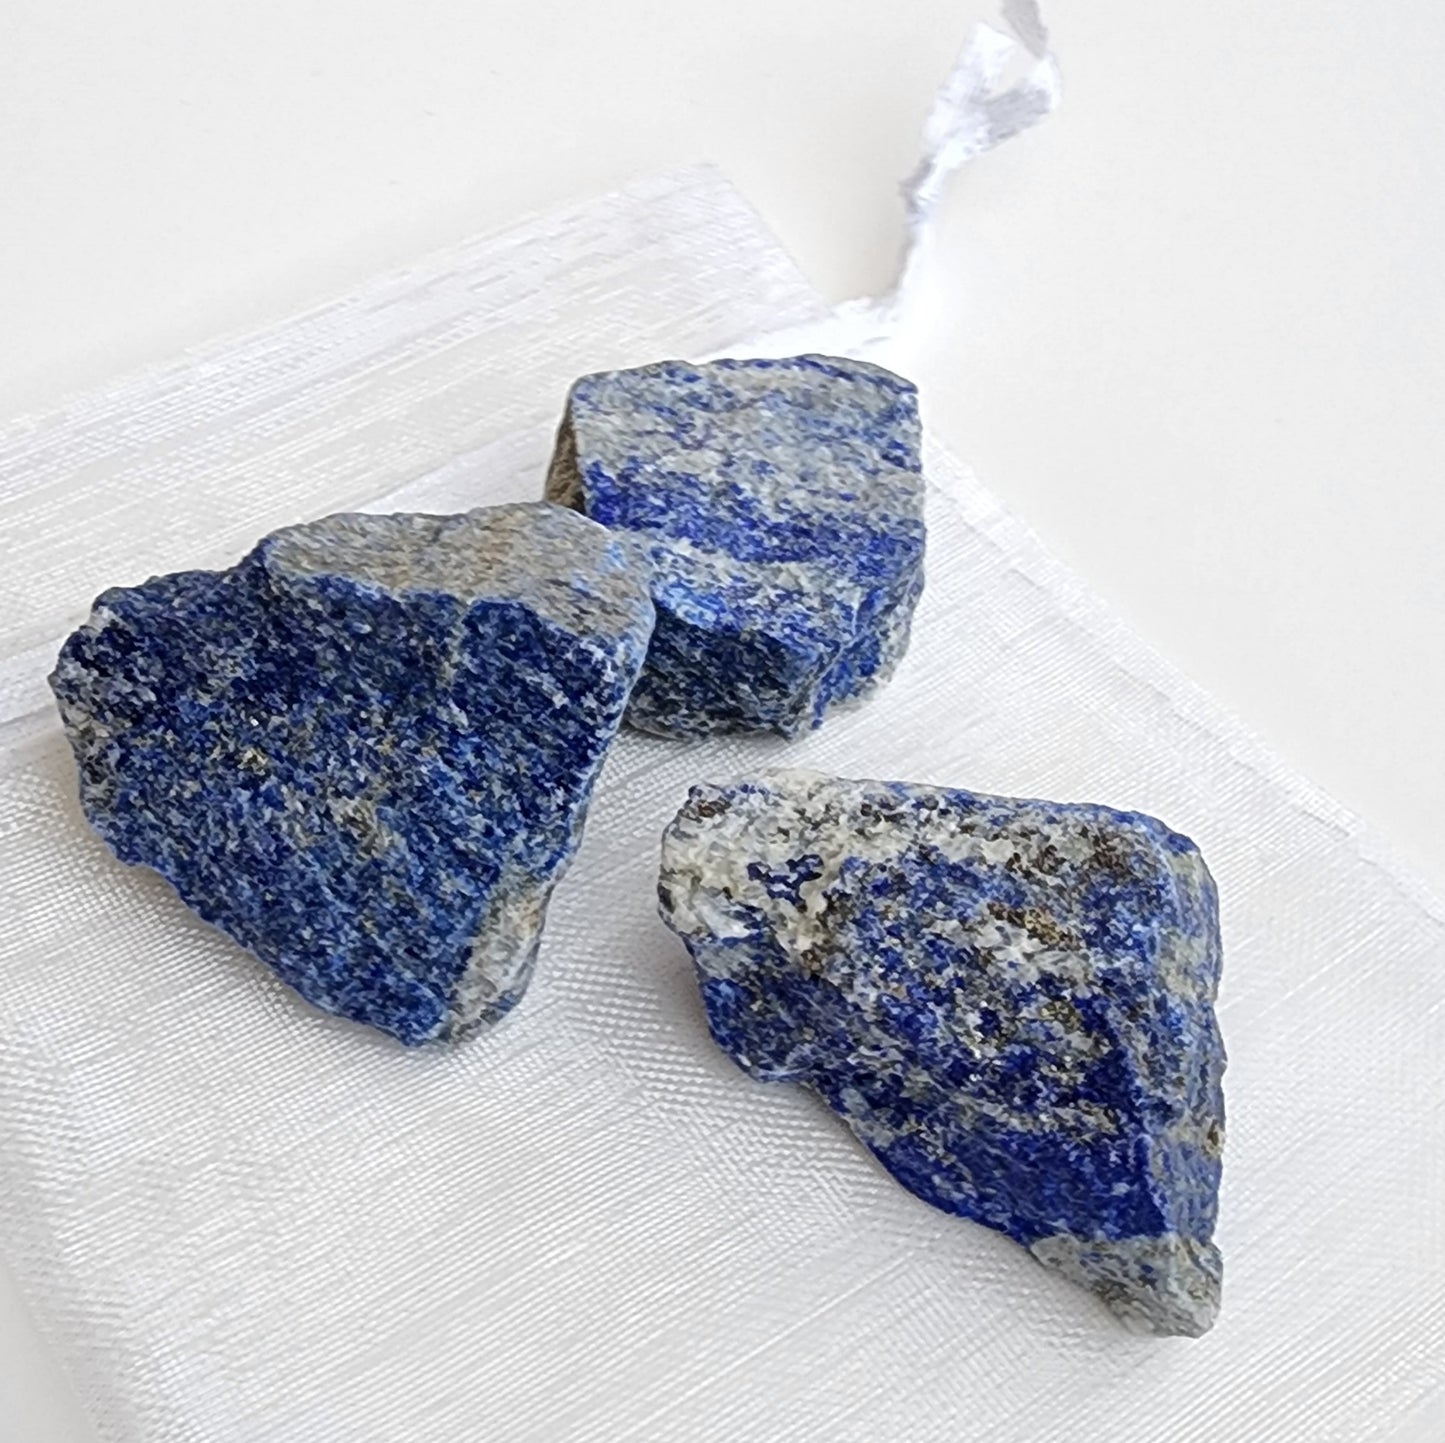 Lapis Lazuli Raw Crystals | Pack of 3